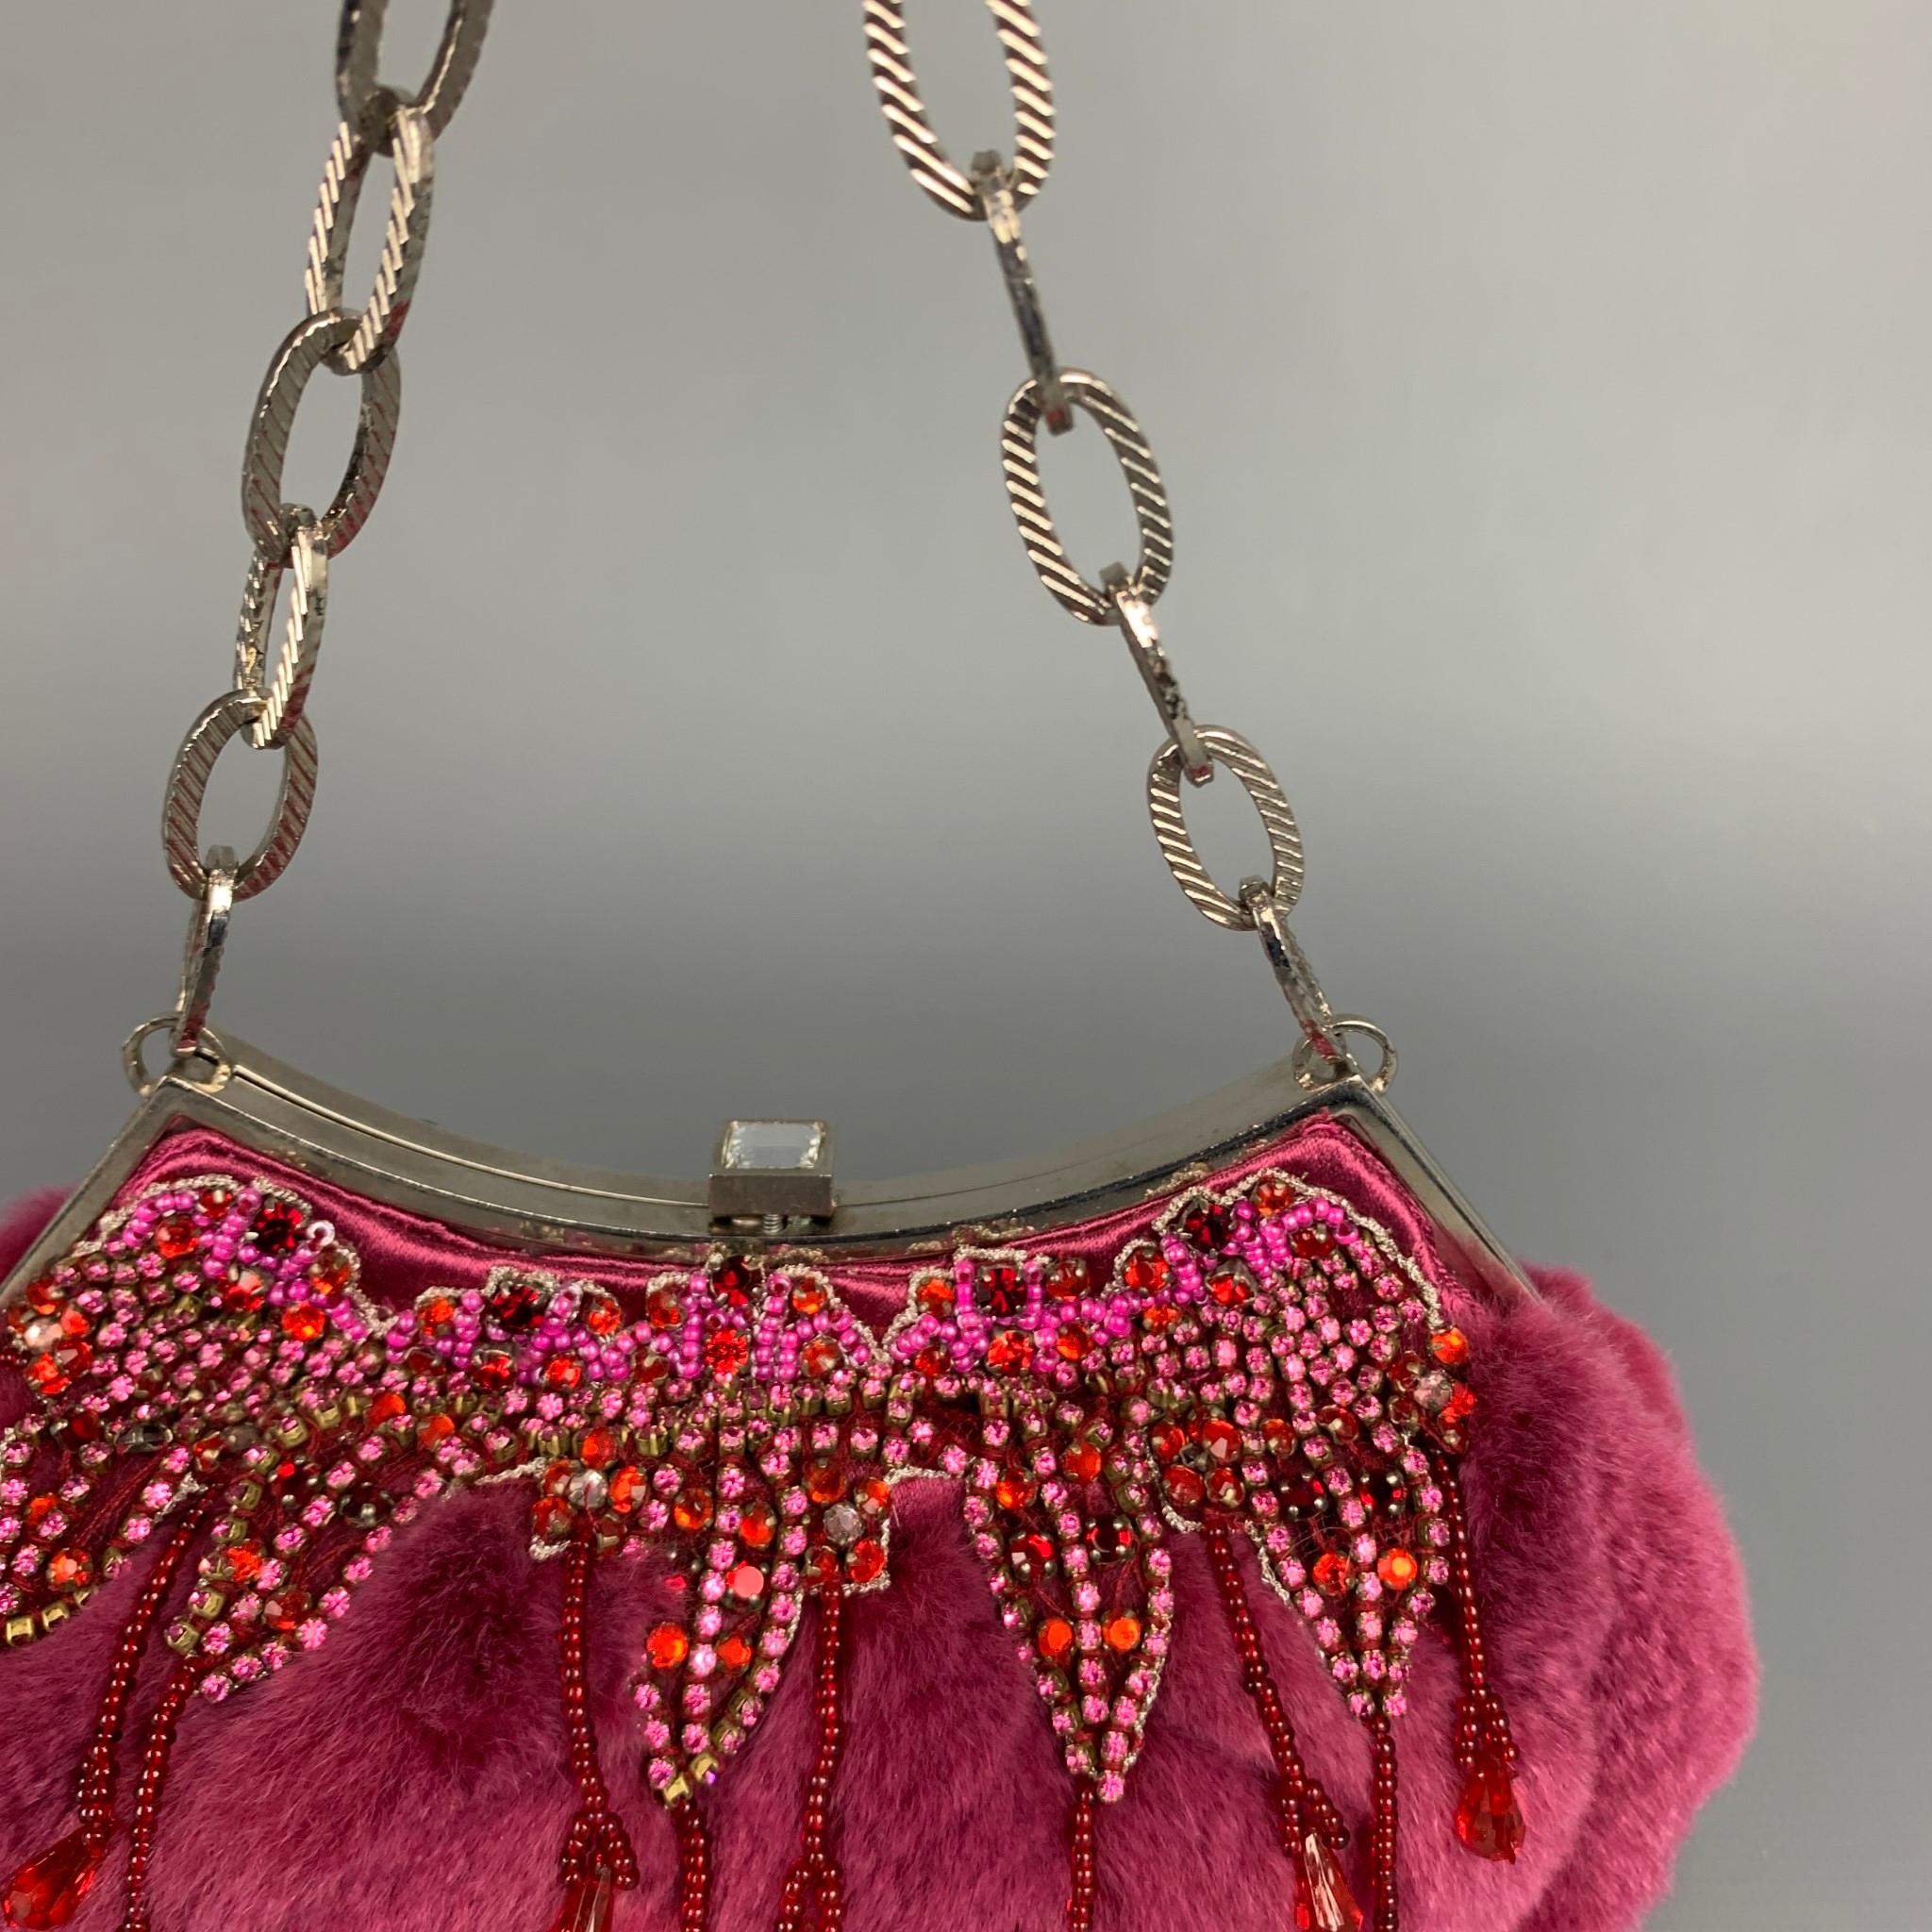 BADGLEY MISCHKA handbag comes in a purple fur with rhinestone details featuring silver tone hardware, beaded details, chain handle, and a clasp closure. 

Very Good Pre-Owned Condition.

Measurements:

Length: 7 in.
Width: 3 in.
Height: 4 in.
Drop: